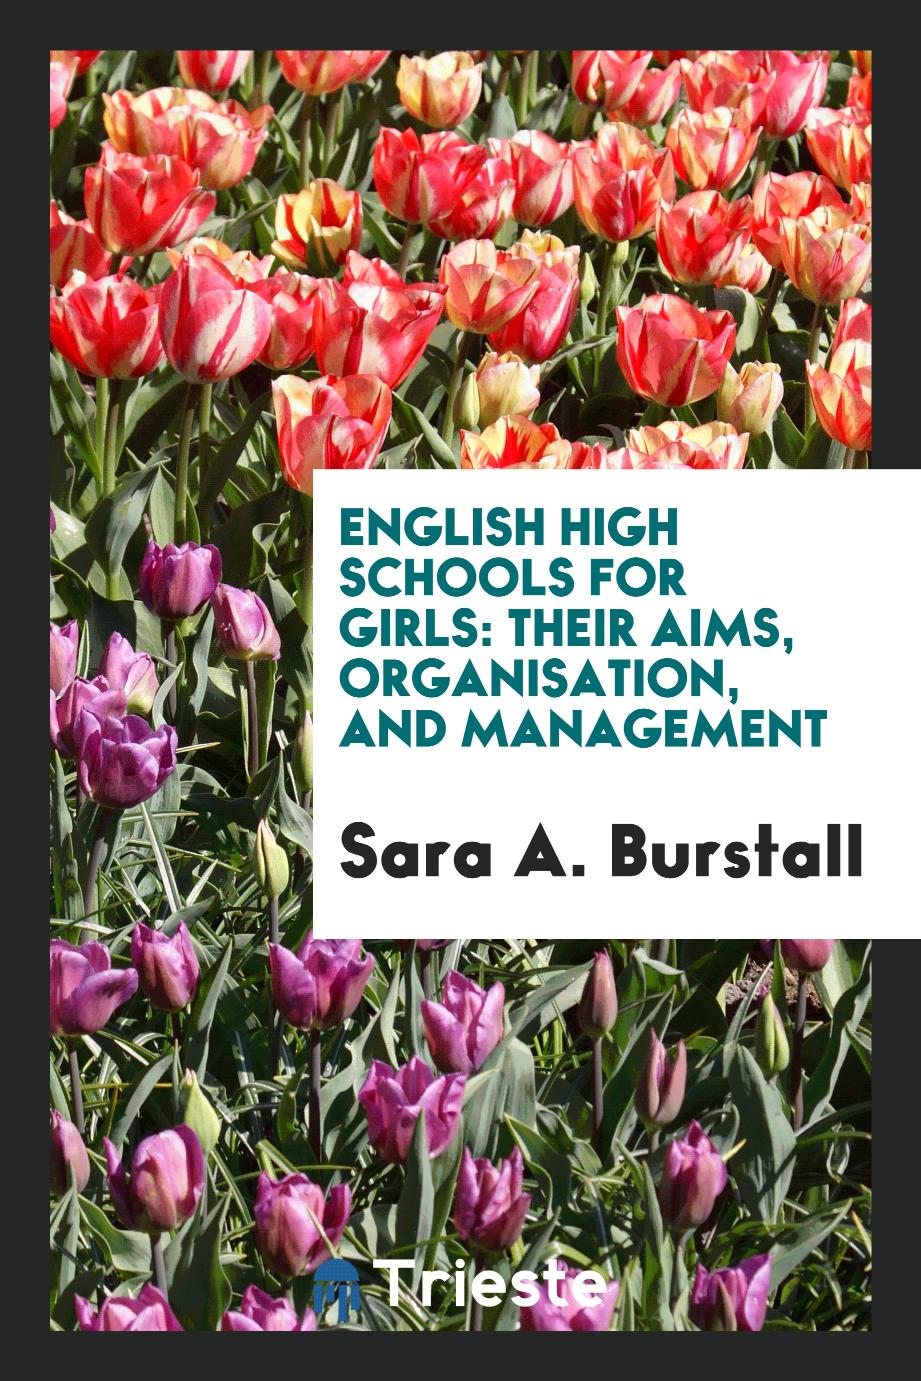 English High Schools for Girls: Their Aims, Organisation, and Management